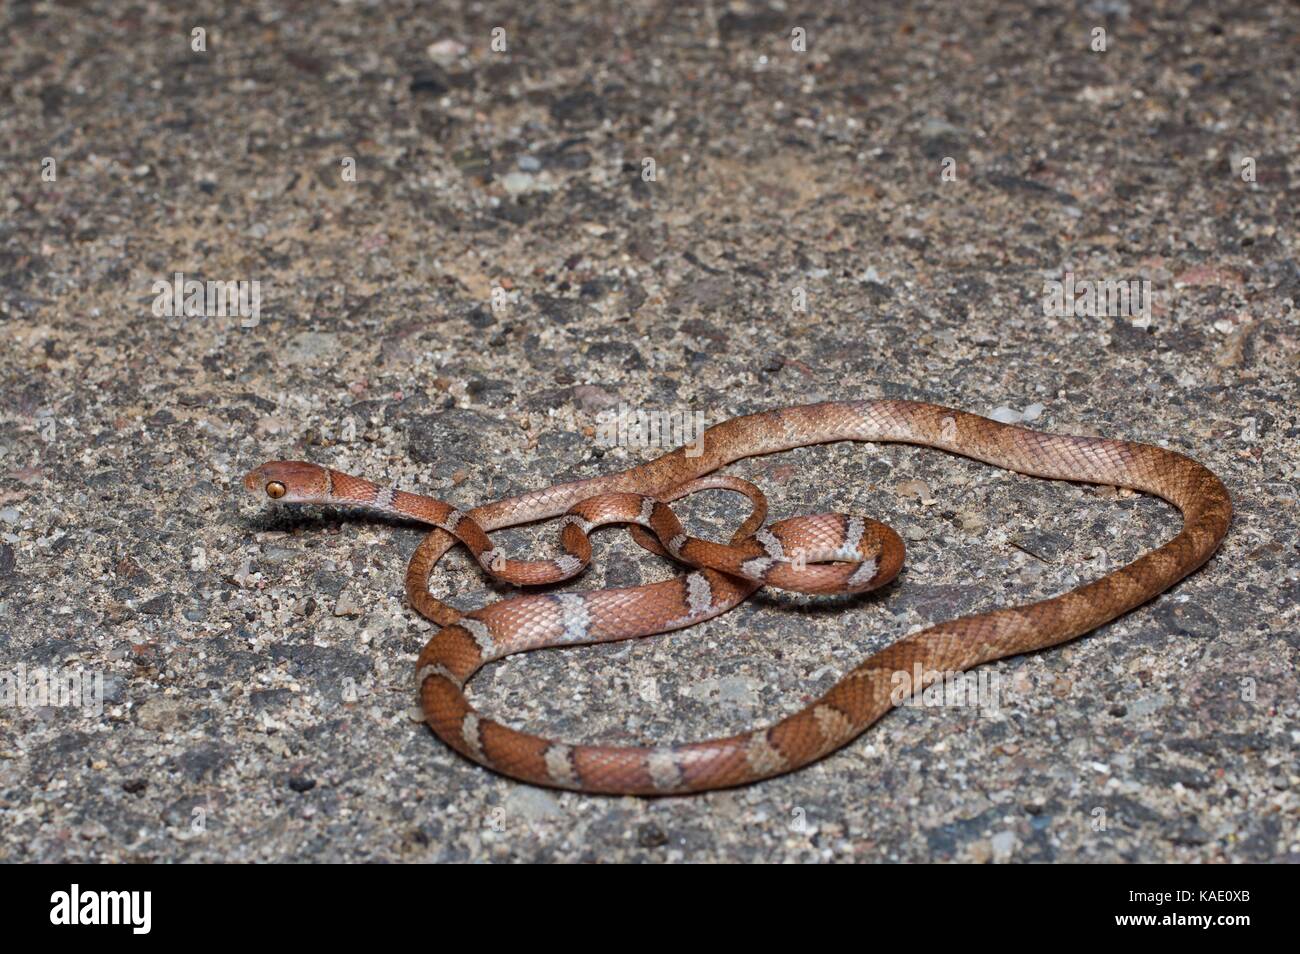 A Central American Tree Snake (Imantodes gemmistratus) on a paved road at night near Álamos, Sonora Mexico Stock Photo